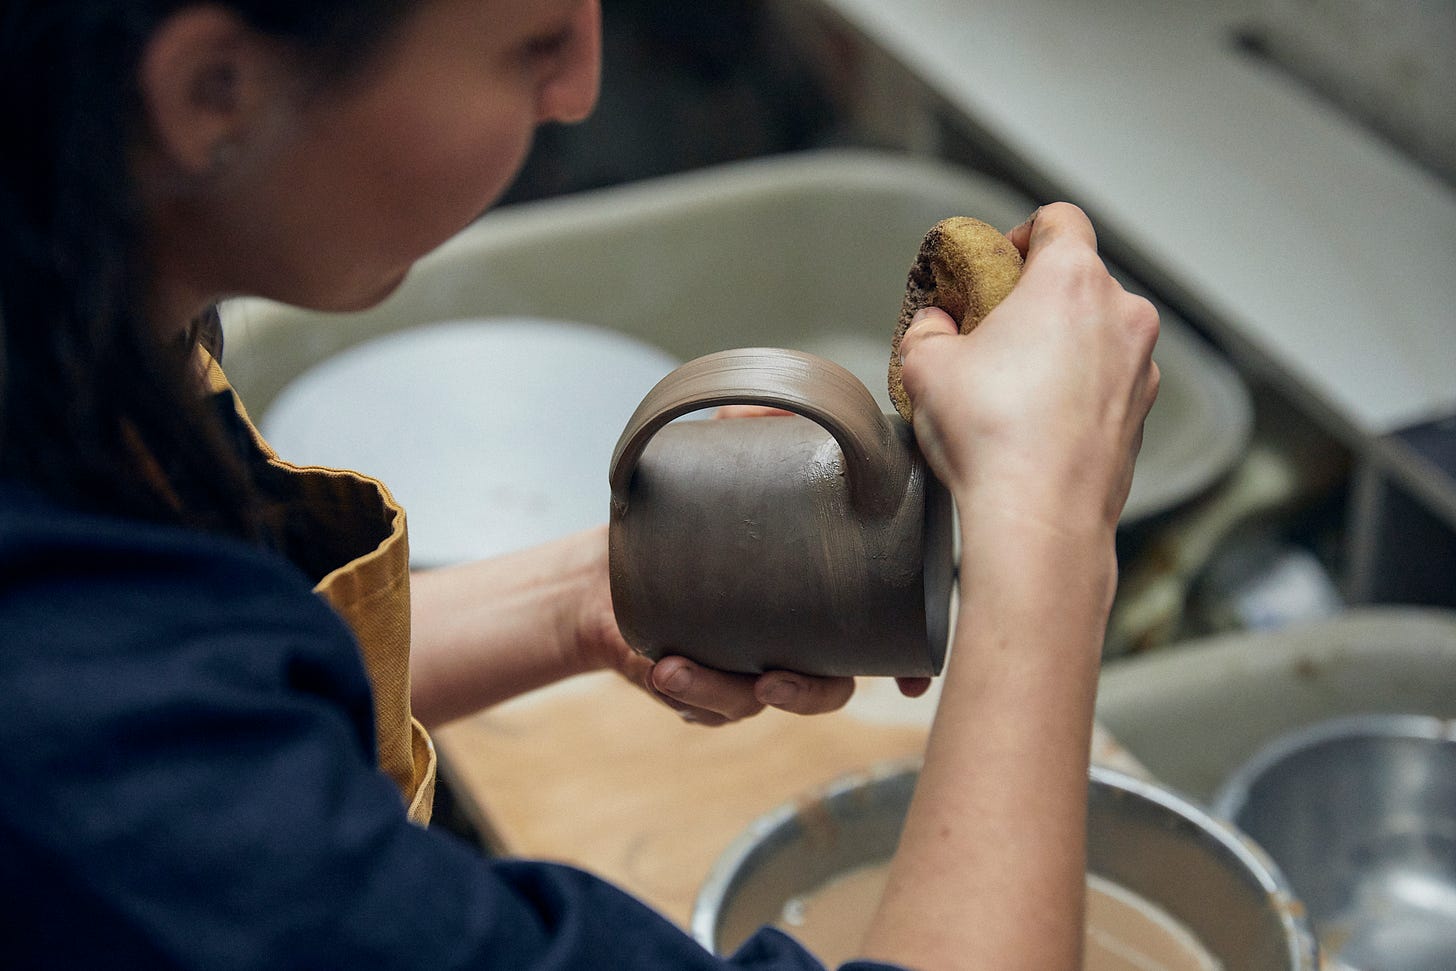 Seeing over the shoulder of a female ceramicist as she works. She is using a sponge to smooth the joint of a handle on a mug.